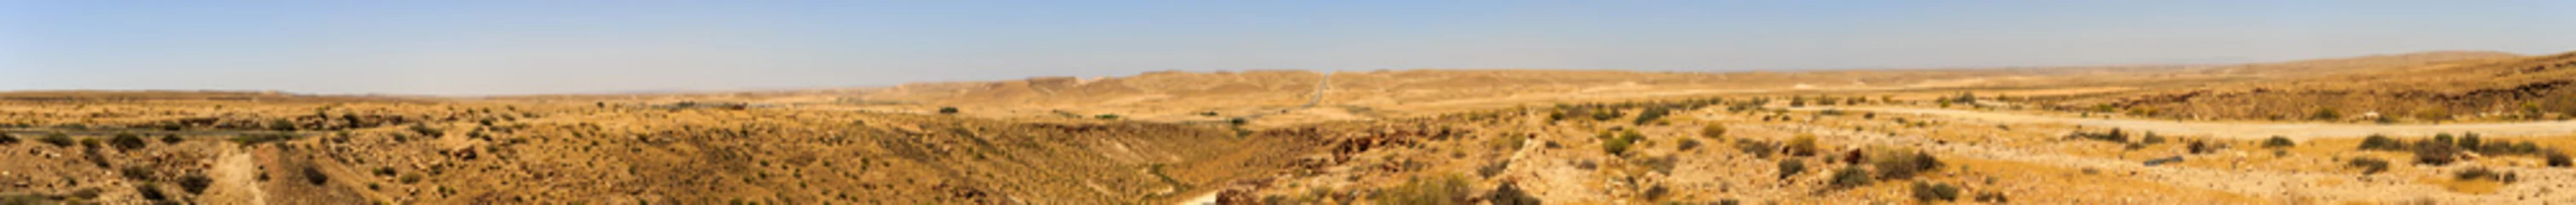  Wide panorama of mountains in Negev desert with road © Vladimir Liverts